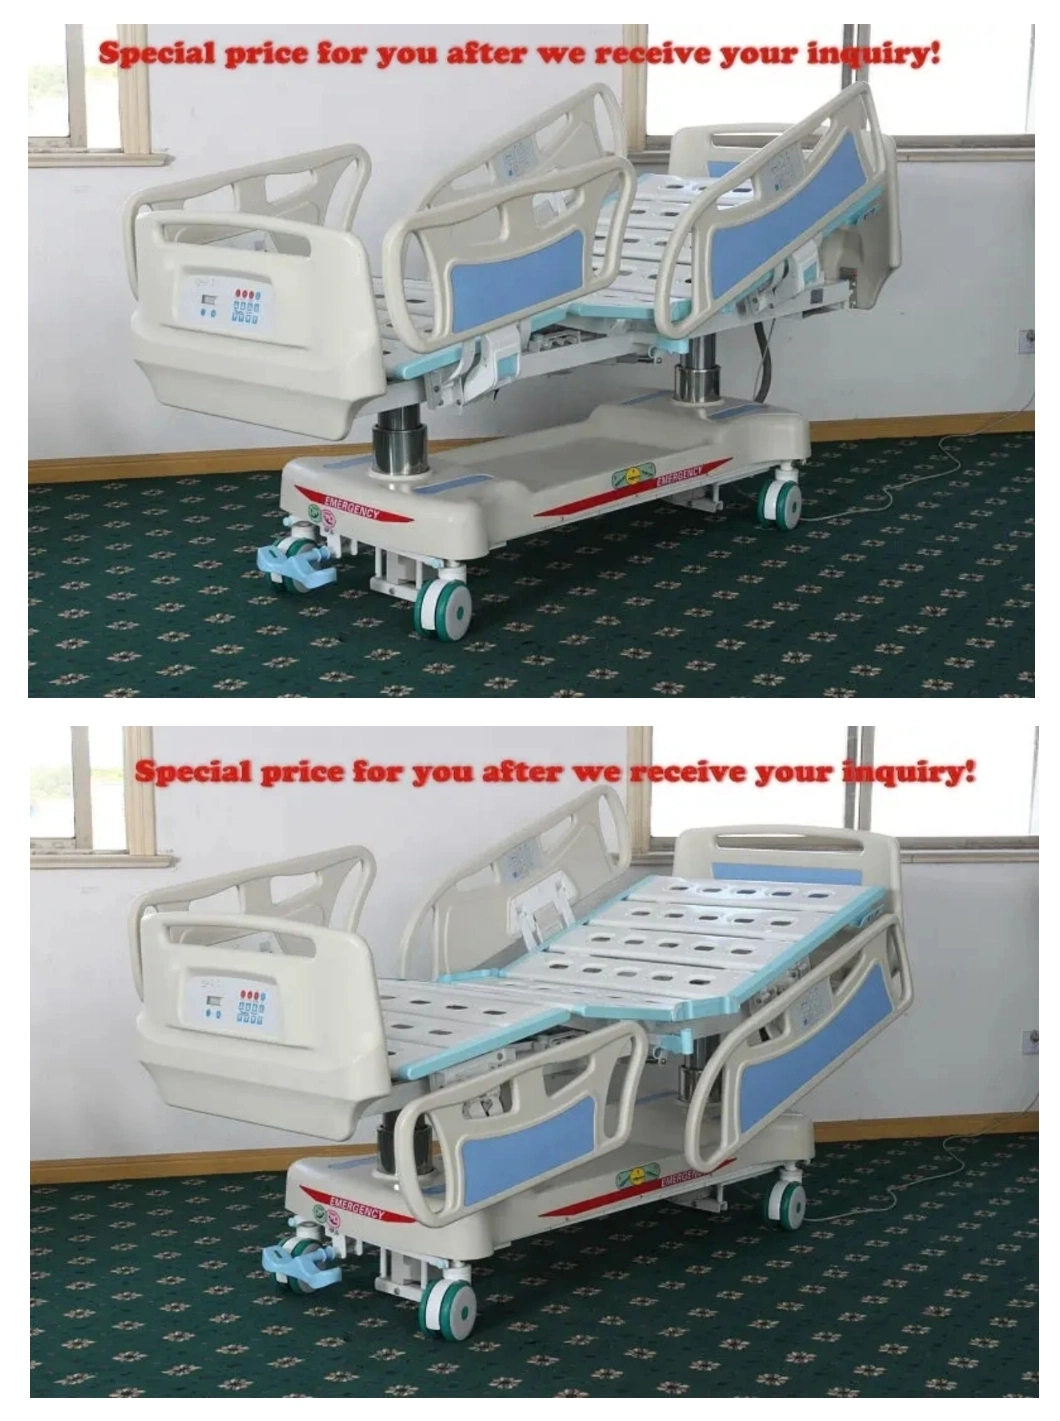 Manufacturers Medical 5 Functions Electric Hospital ICU Bed with Weight Readings